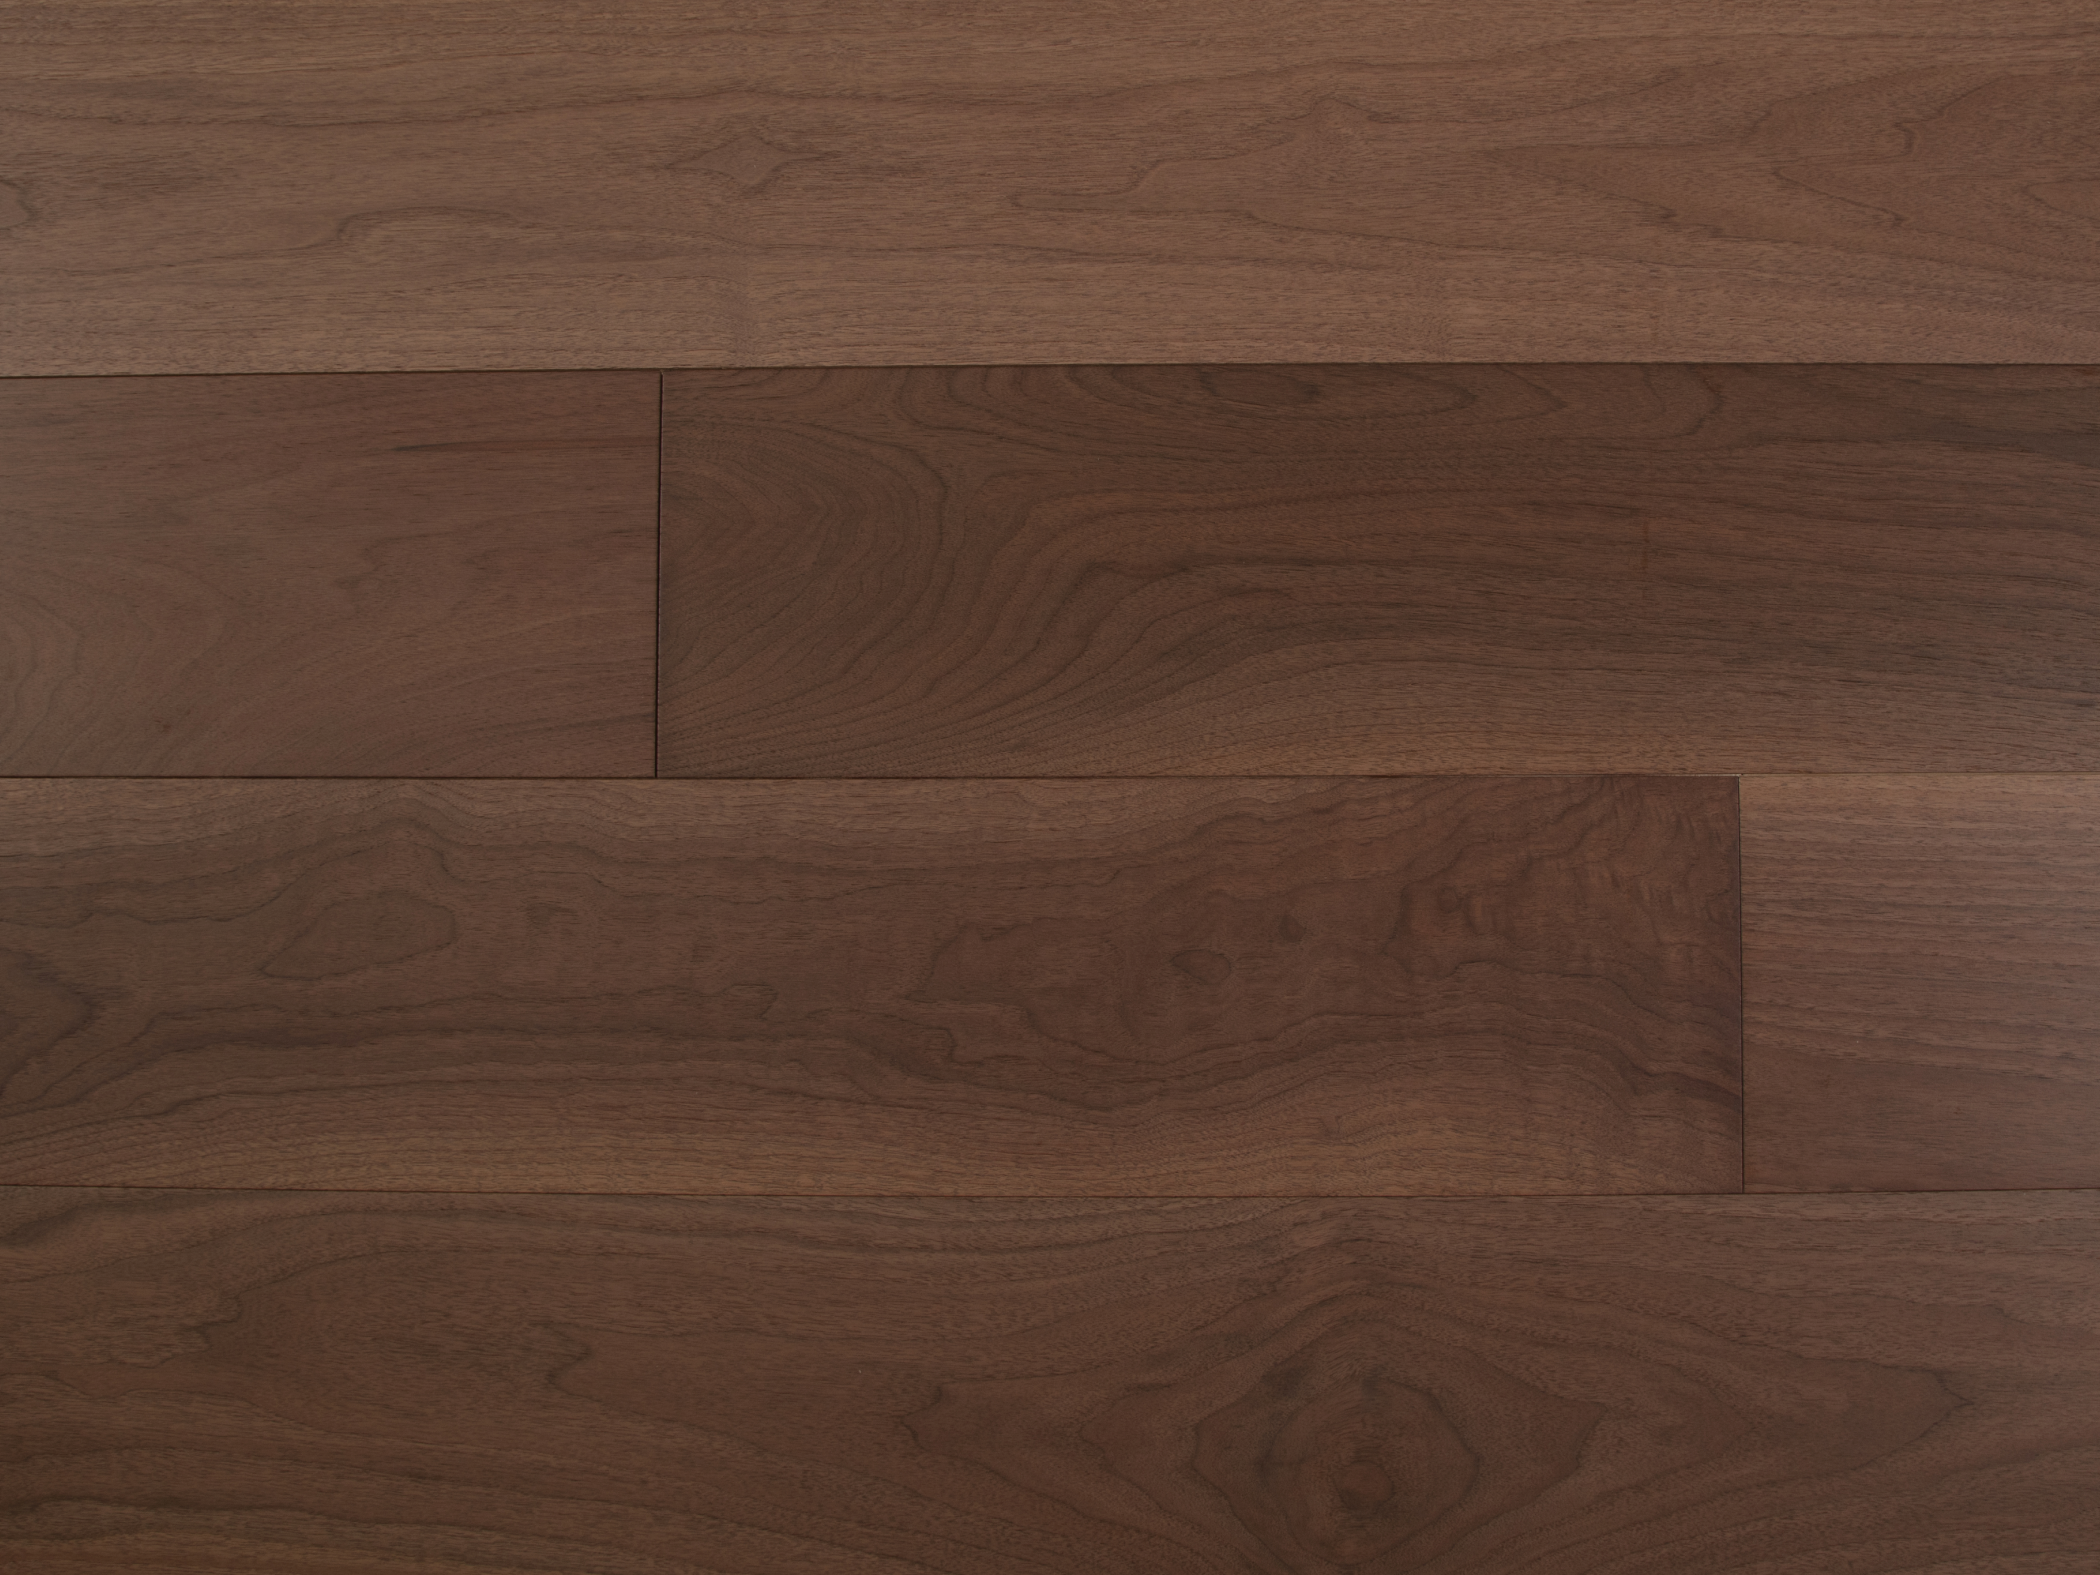 Vidar American Black Walnut Naked Walnut 3/4" x 10 1/4" Wire Brushed Character (ABCD)